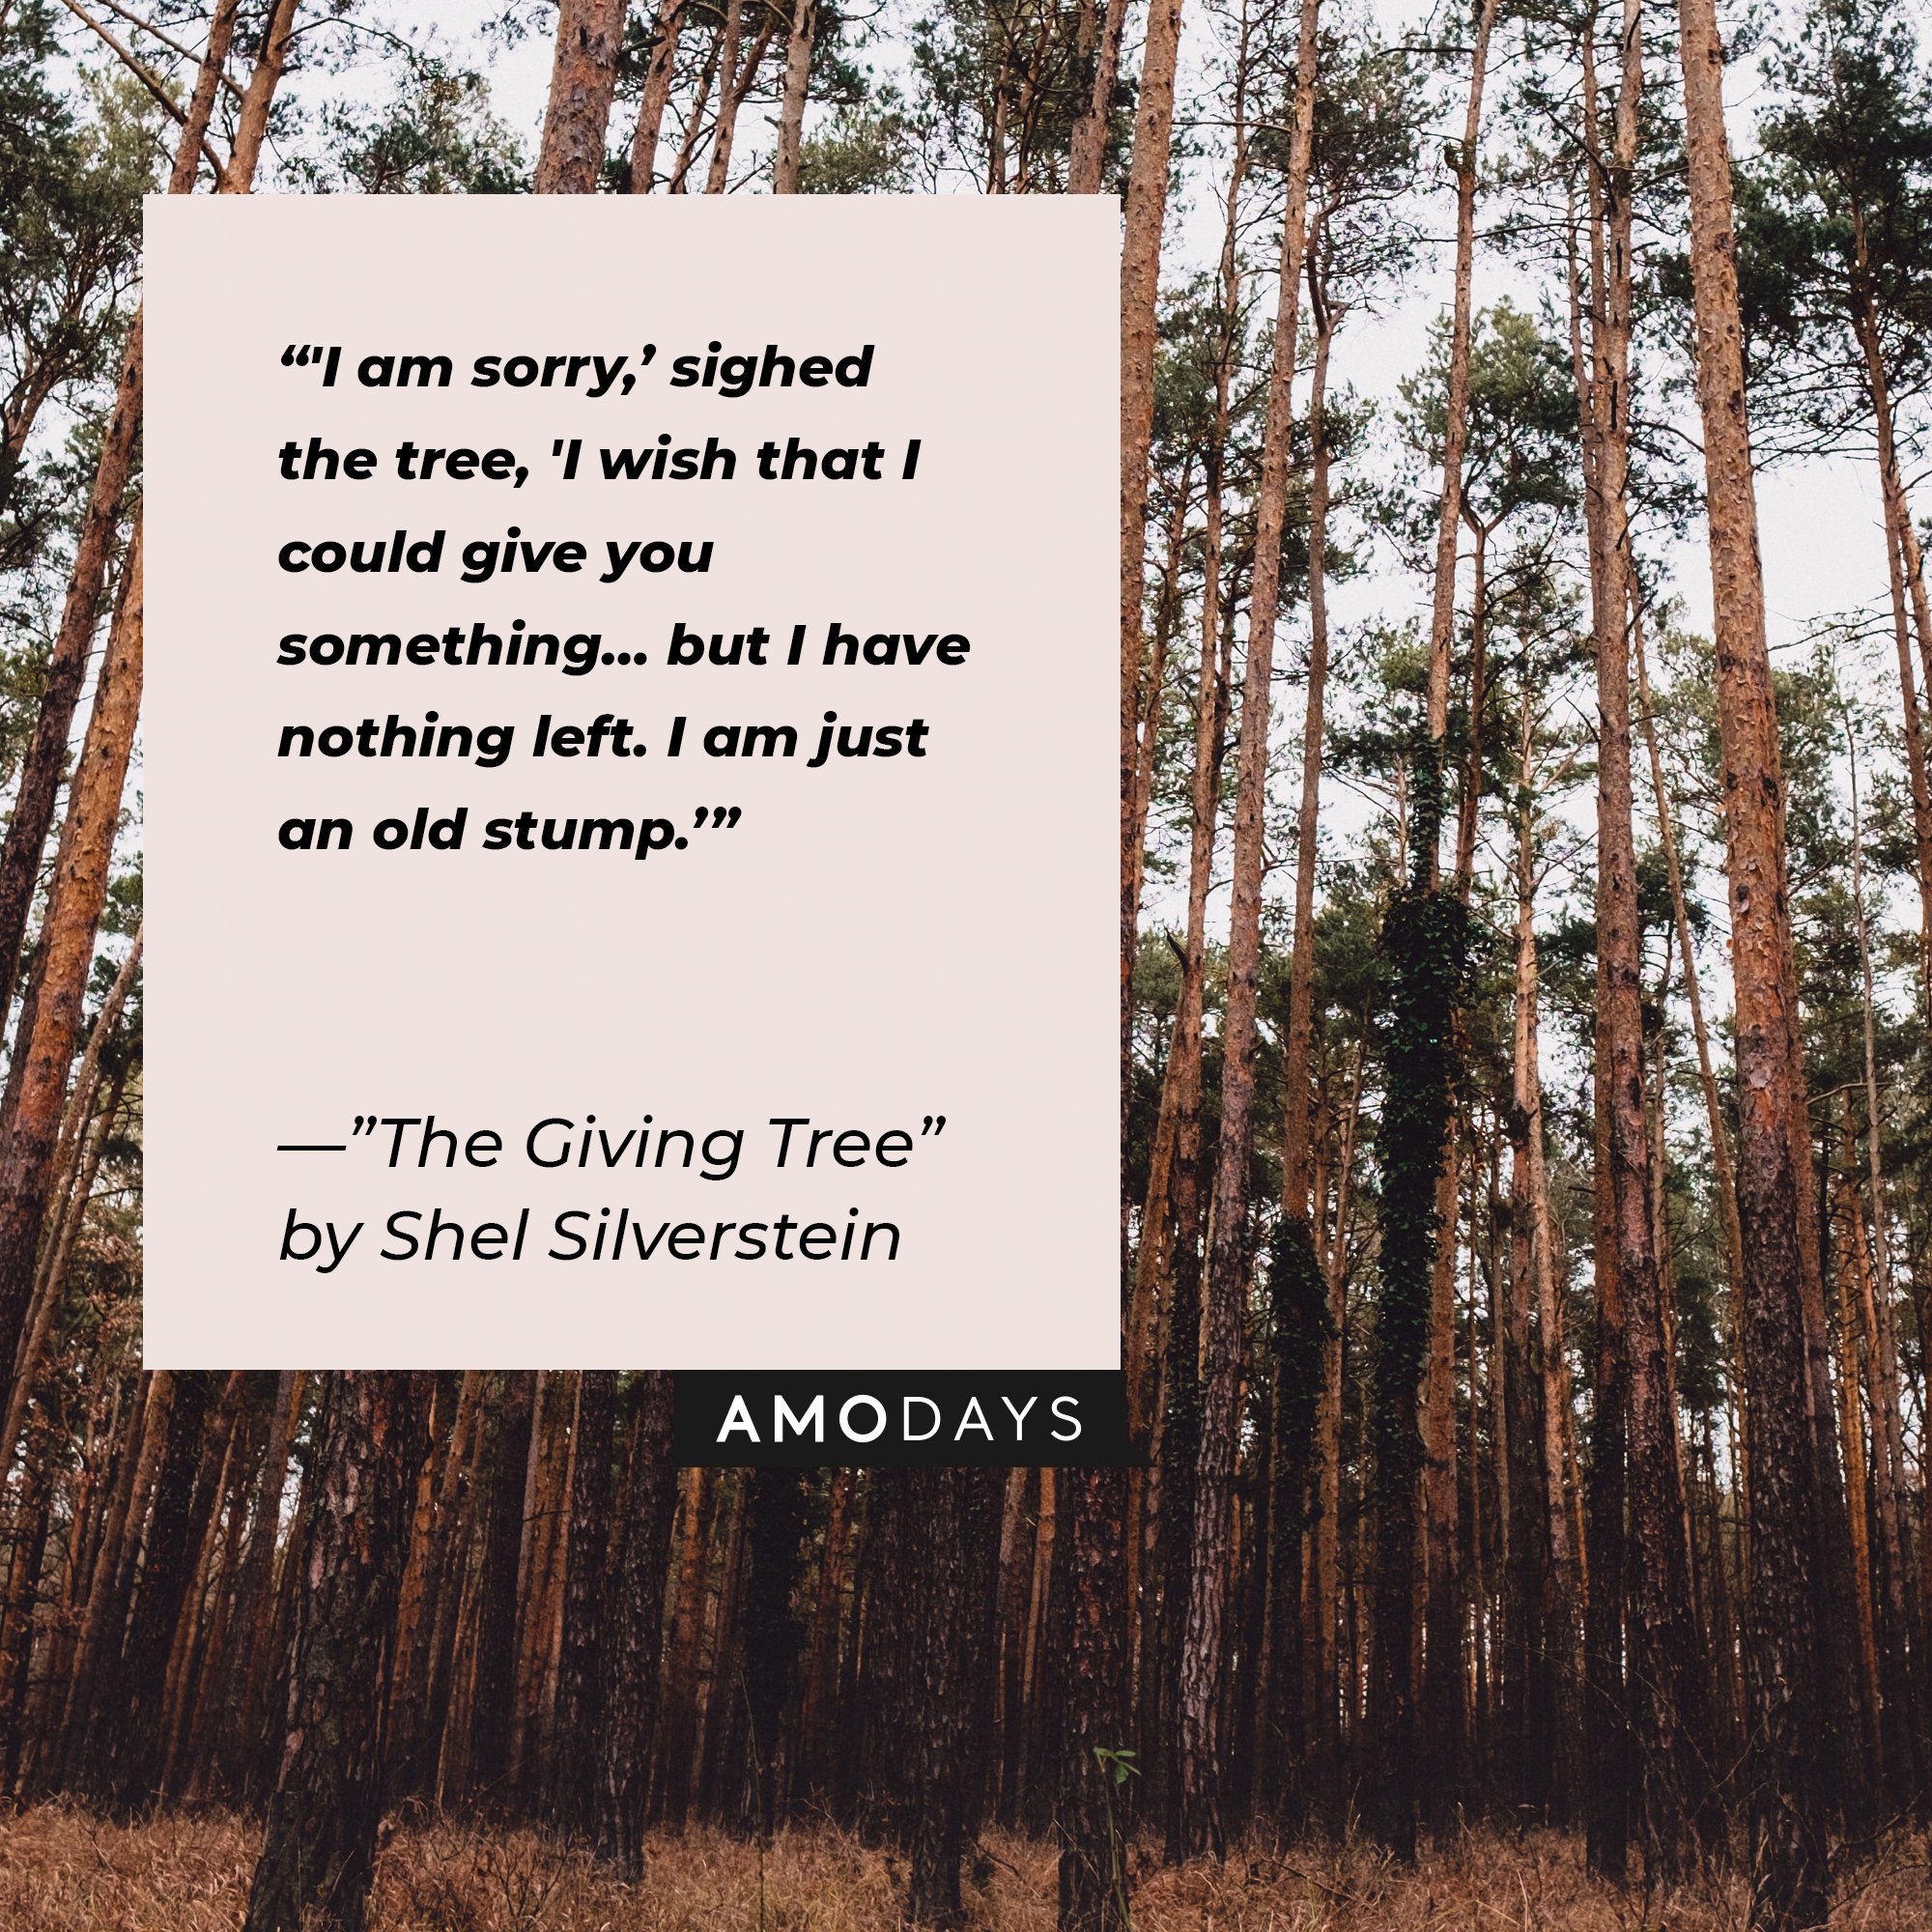  Quotes from Shel Silverstein’s "Giving Tree”: "'I am sorry,' sighed the tree, 'I wish that I could give you something…but I have nothing left. I am just an old stump.'" | Image: AmoDays